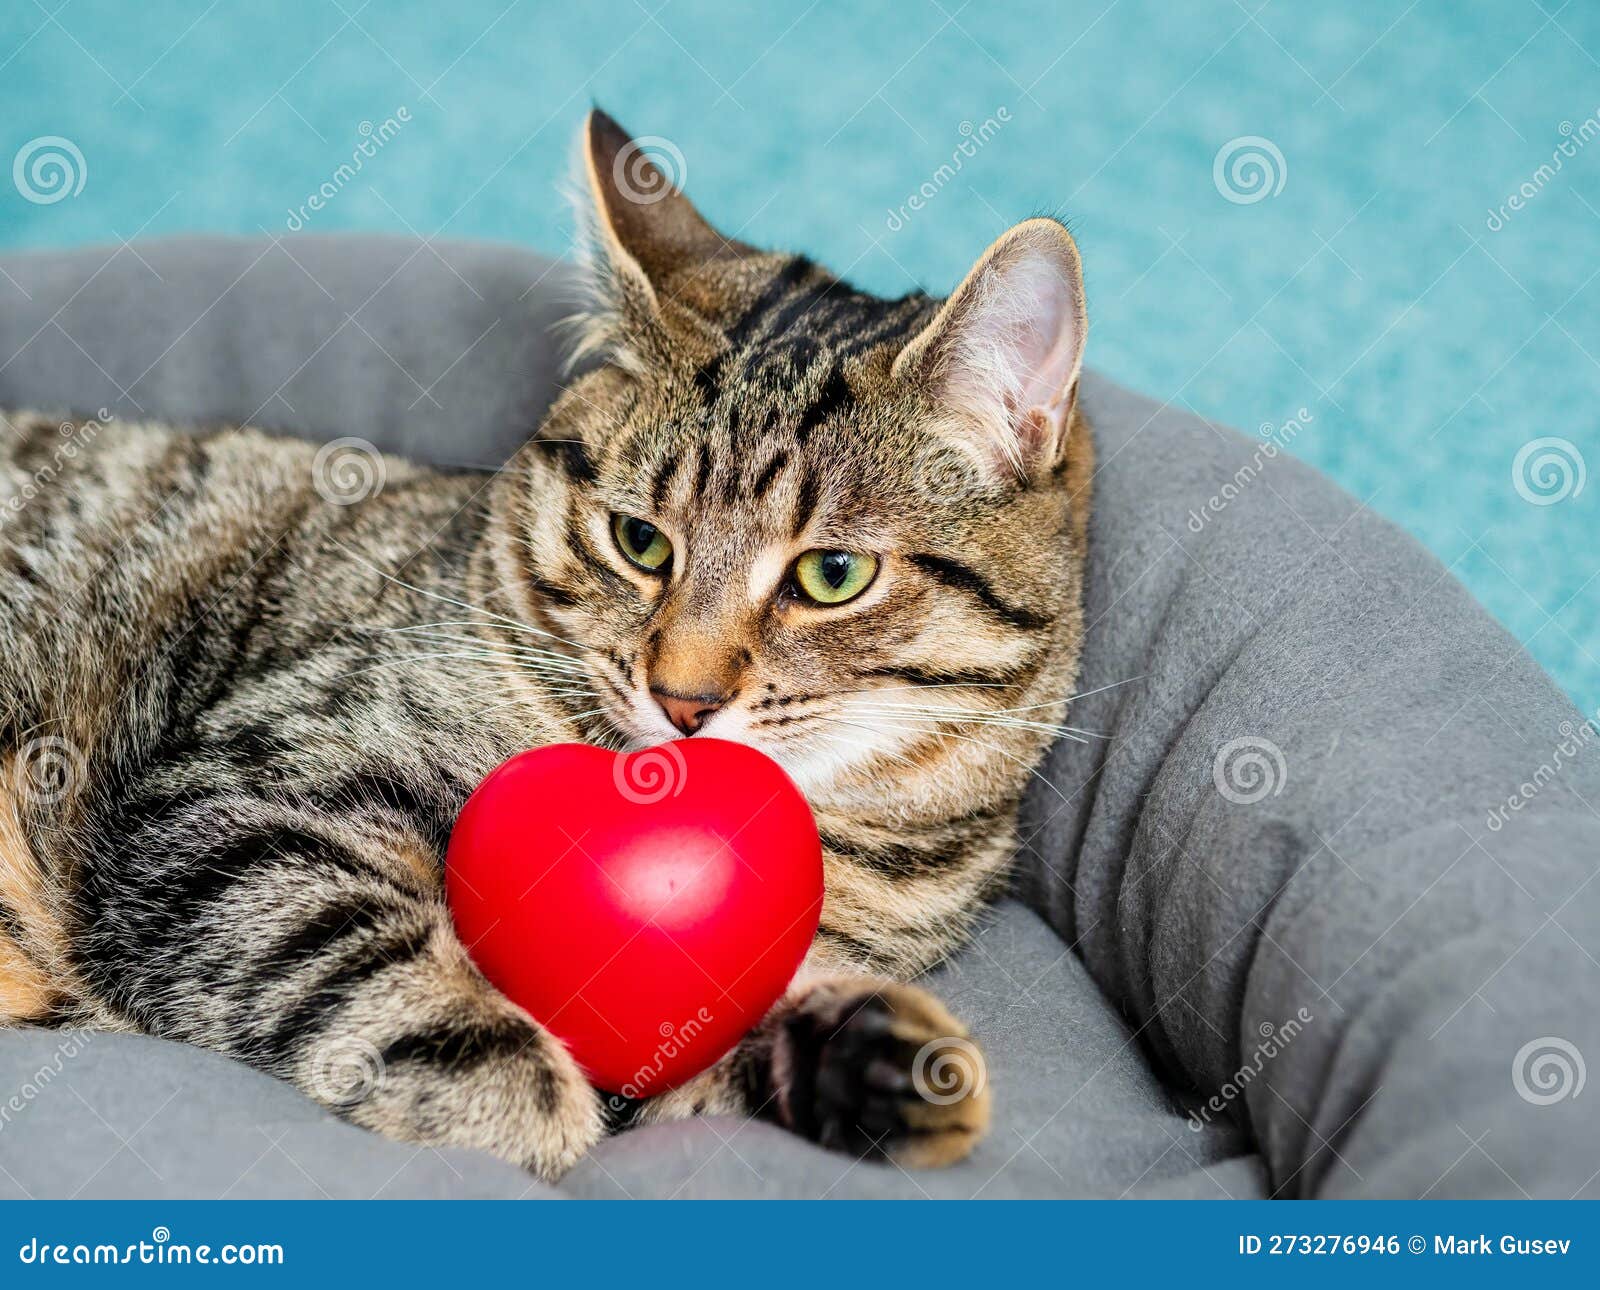 cute adorable tabby cat posing with red heart  of love. passion for home pet concept. hot macho male in animal world. pet